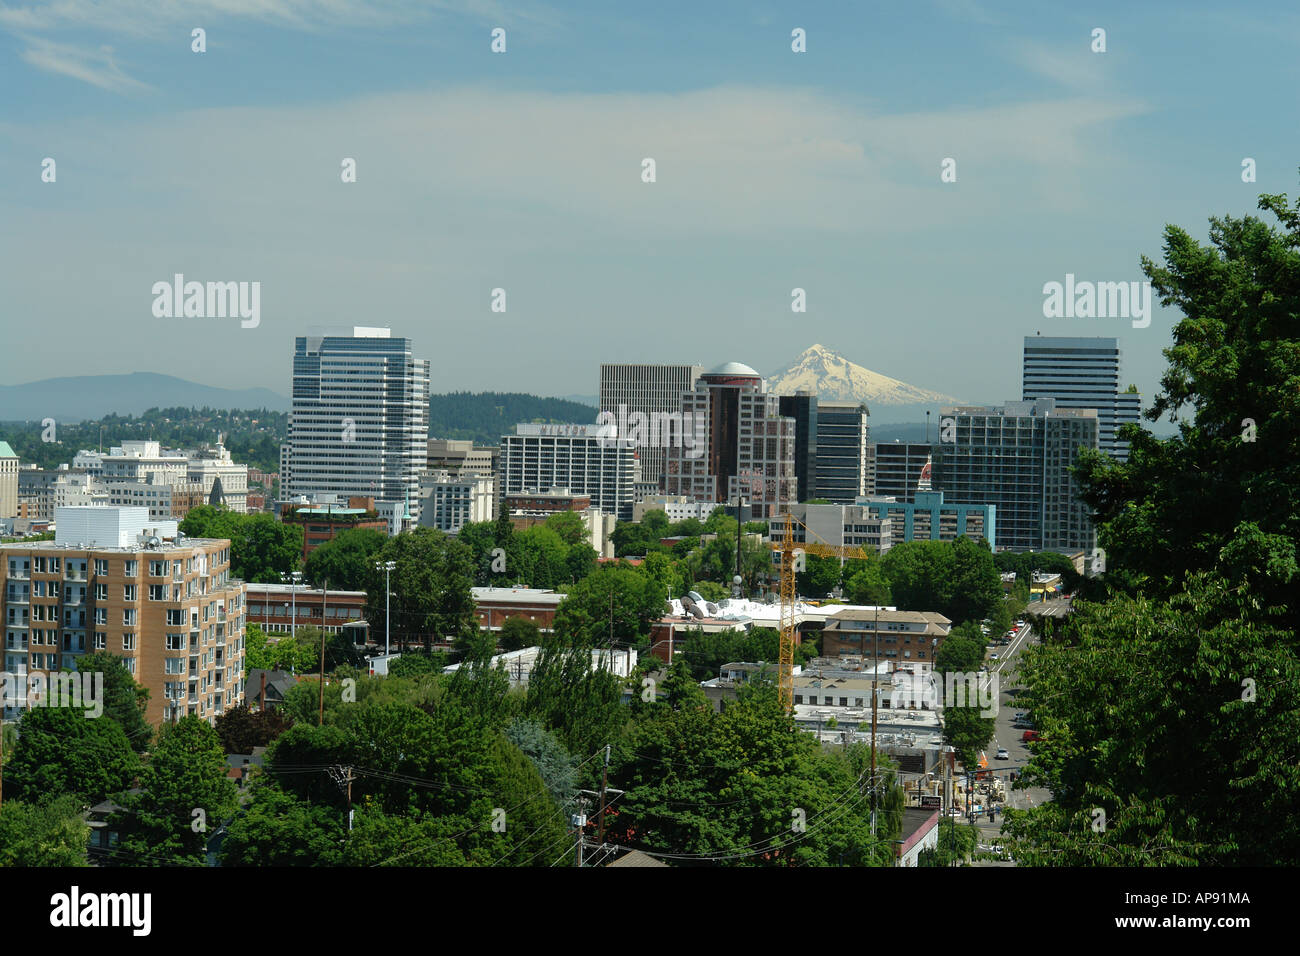 AJD52036, Portland, OR, Oregon, downtown, aerial view from Washington Park Stock Photo